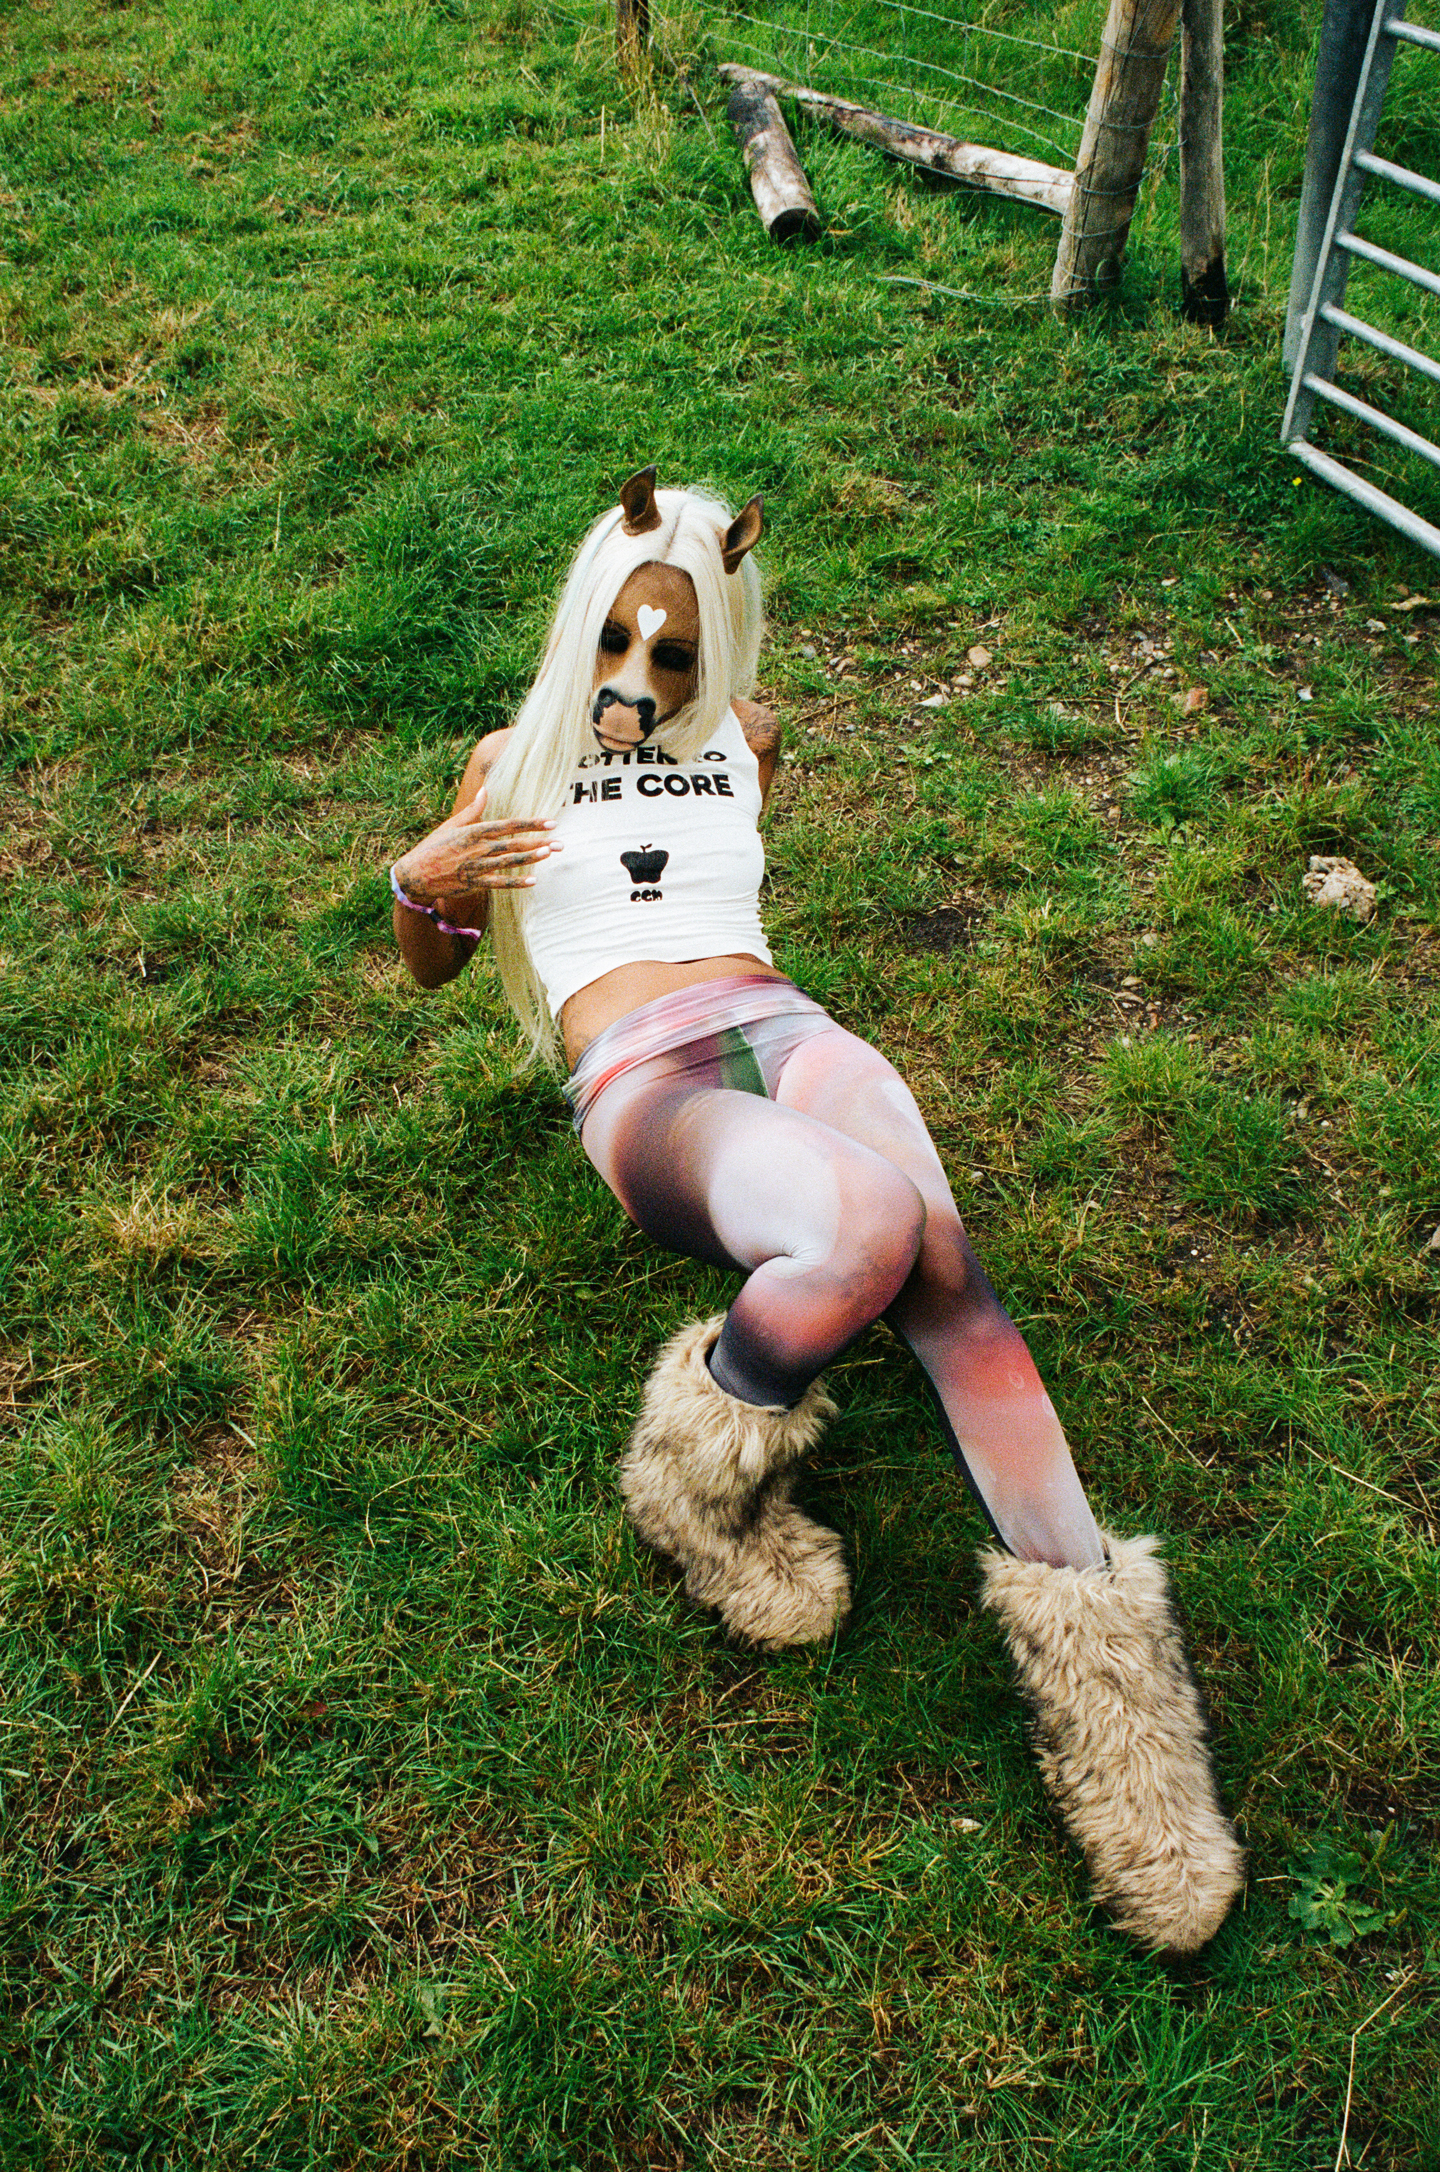 the DJ horsegiirL reclines in the grass in a tank top, leggings and furry boots 